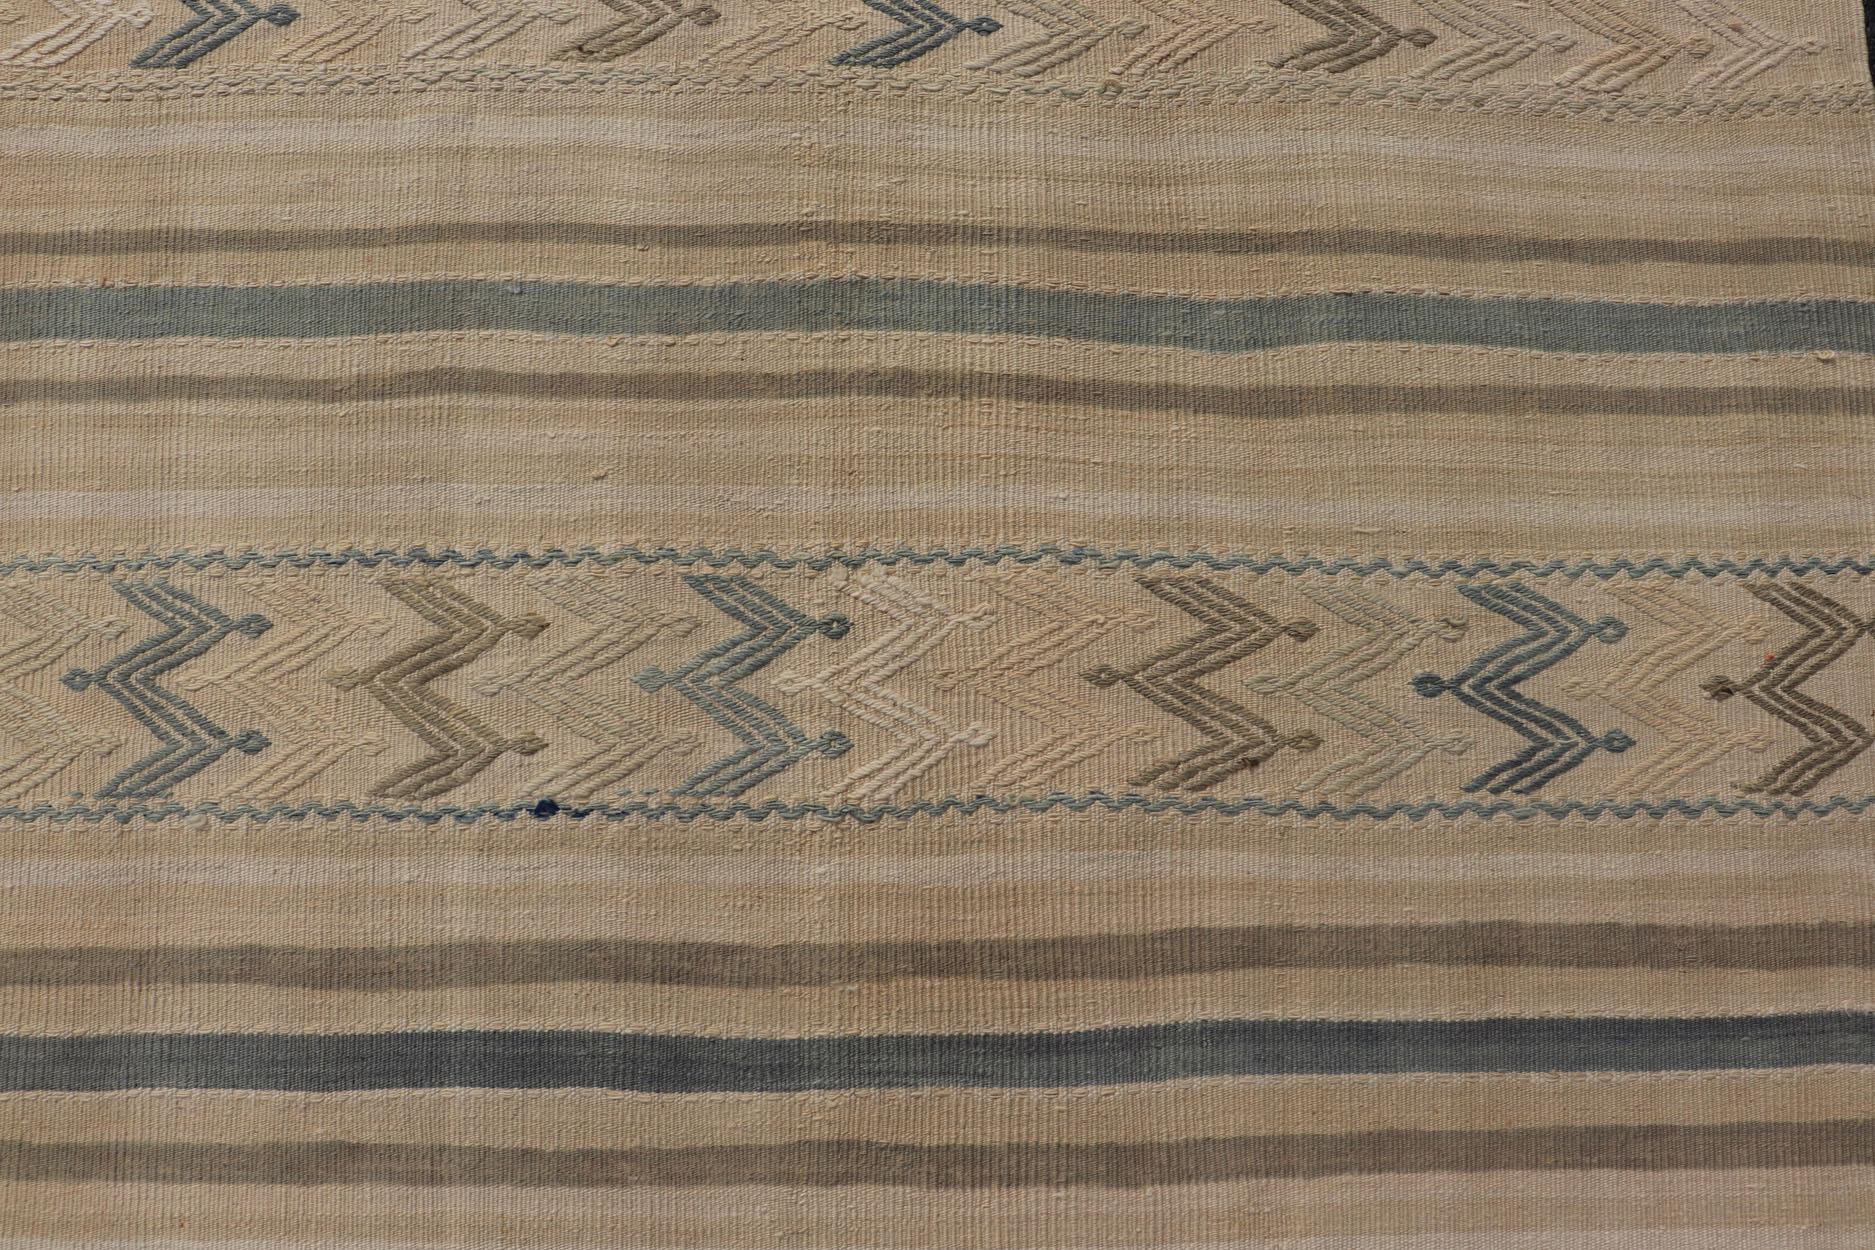 Hand-Woven Vintage Turkish Flat-Weave with Embroideries in Earth Tones and Blue For Sale